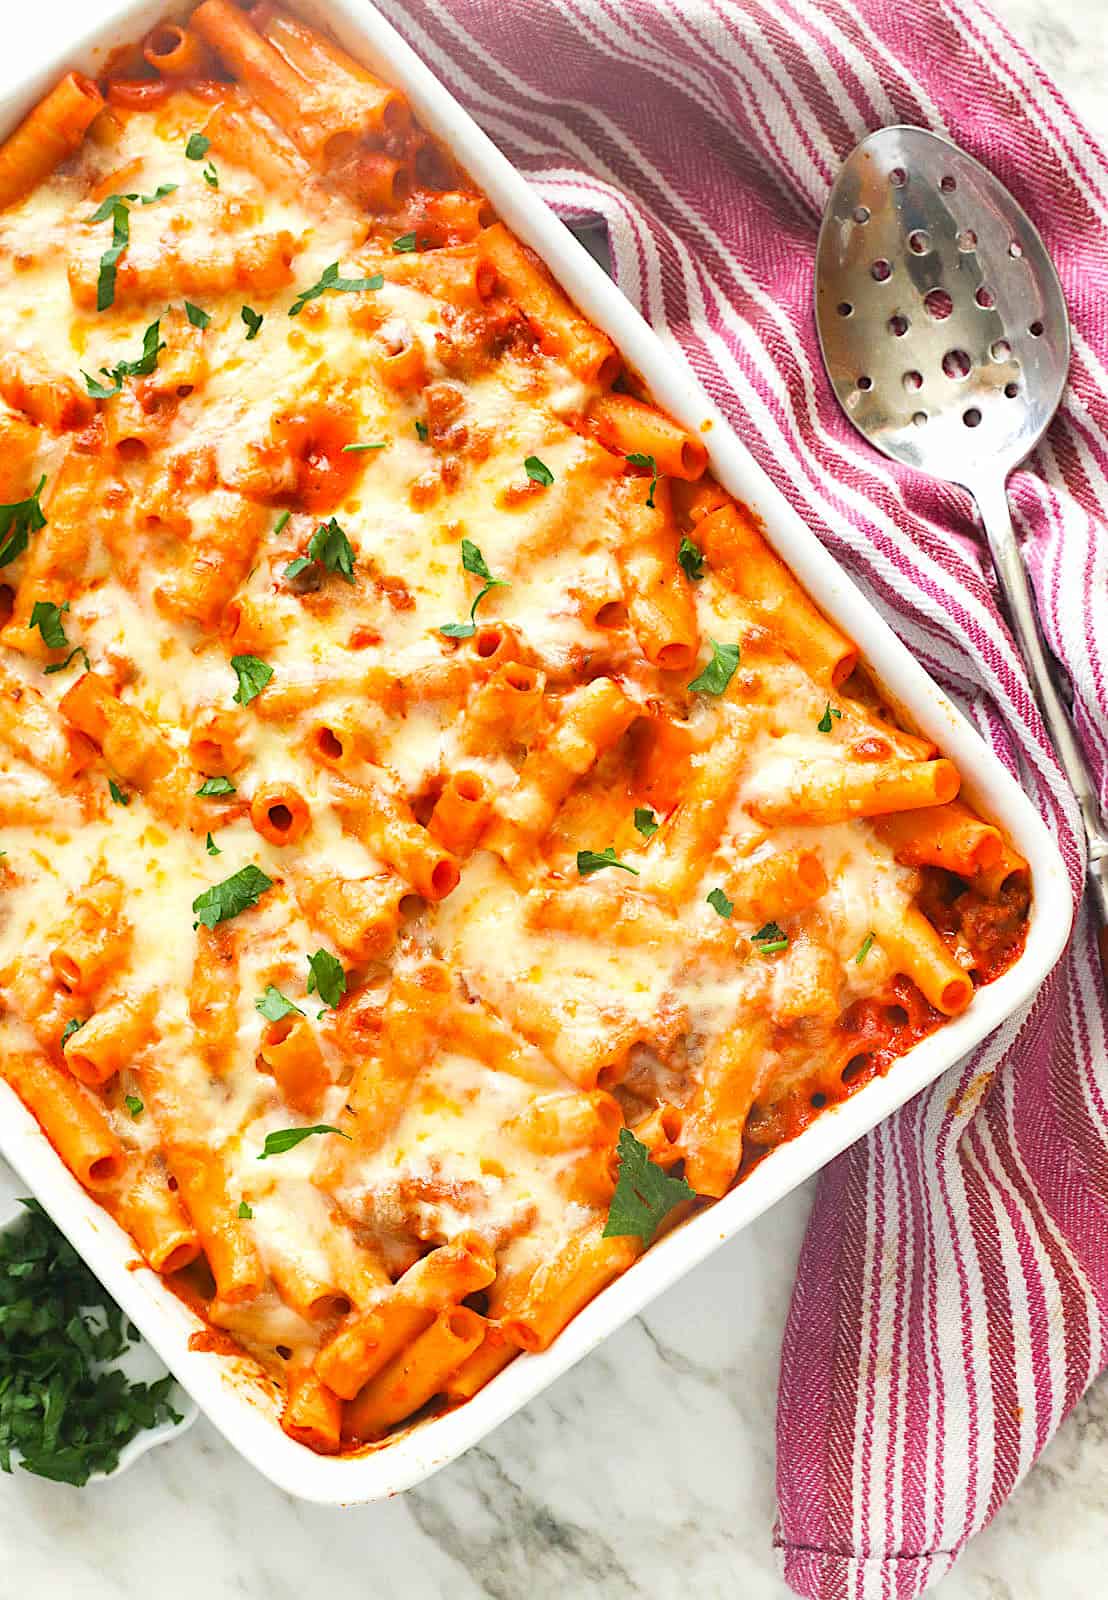 Mouth-watering grilled ziti for miles of smiles